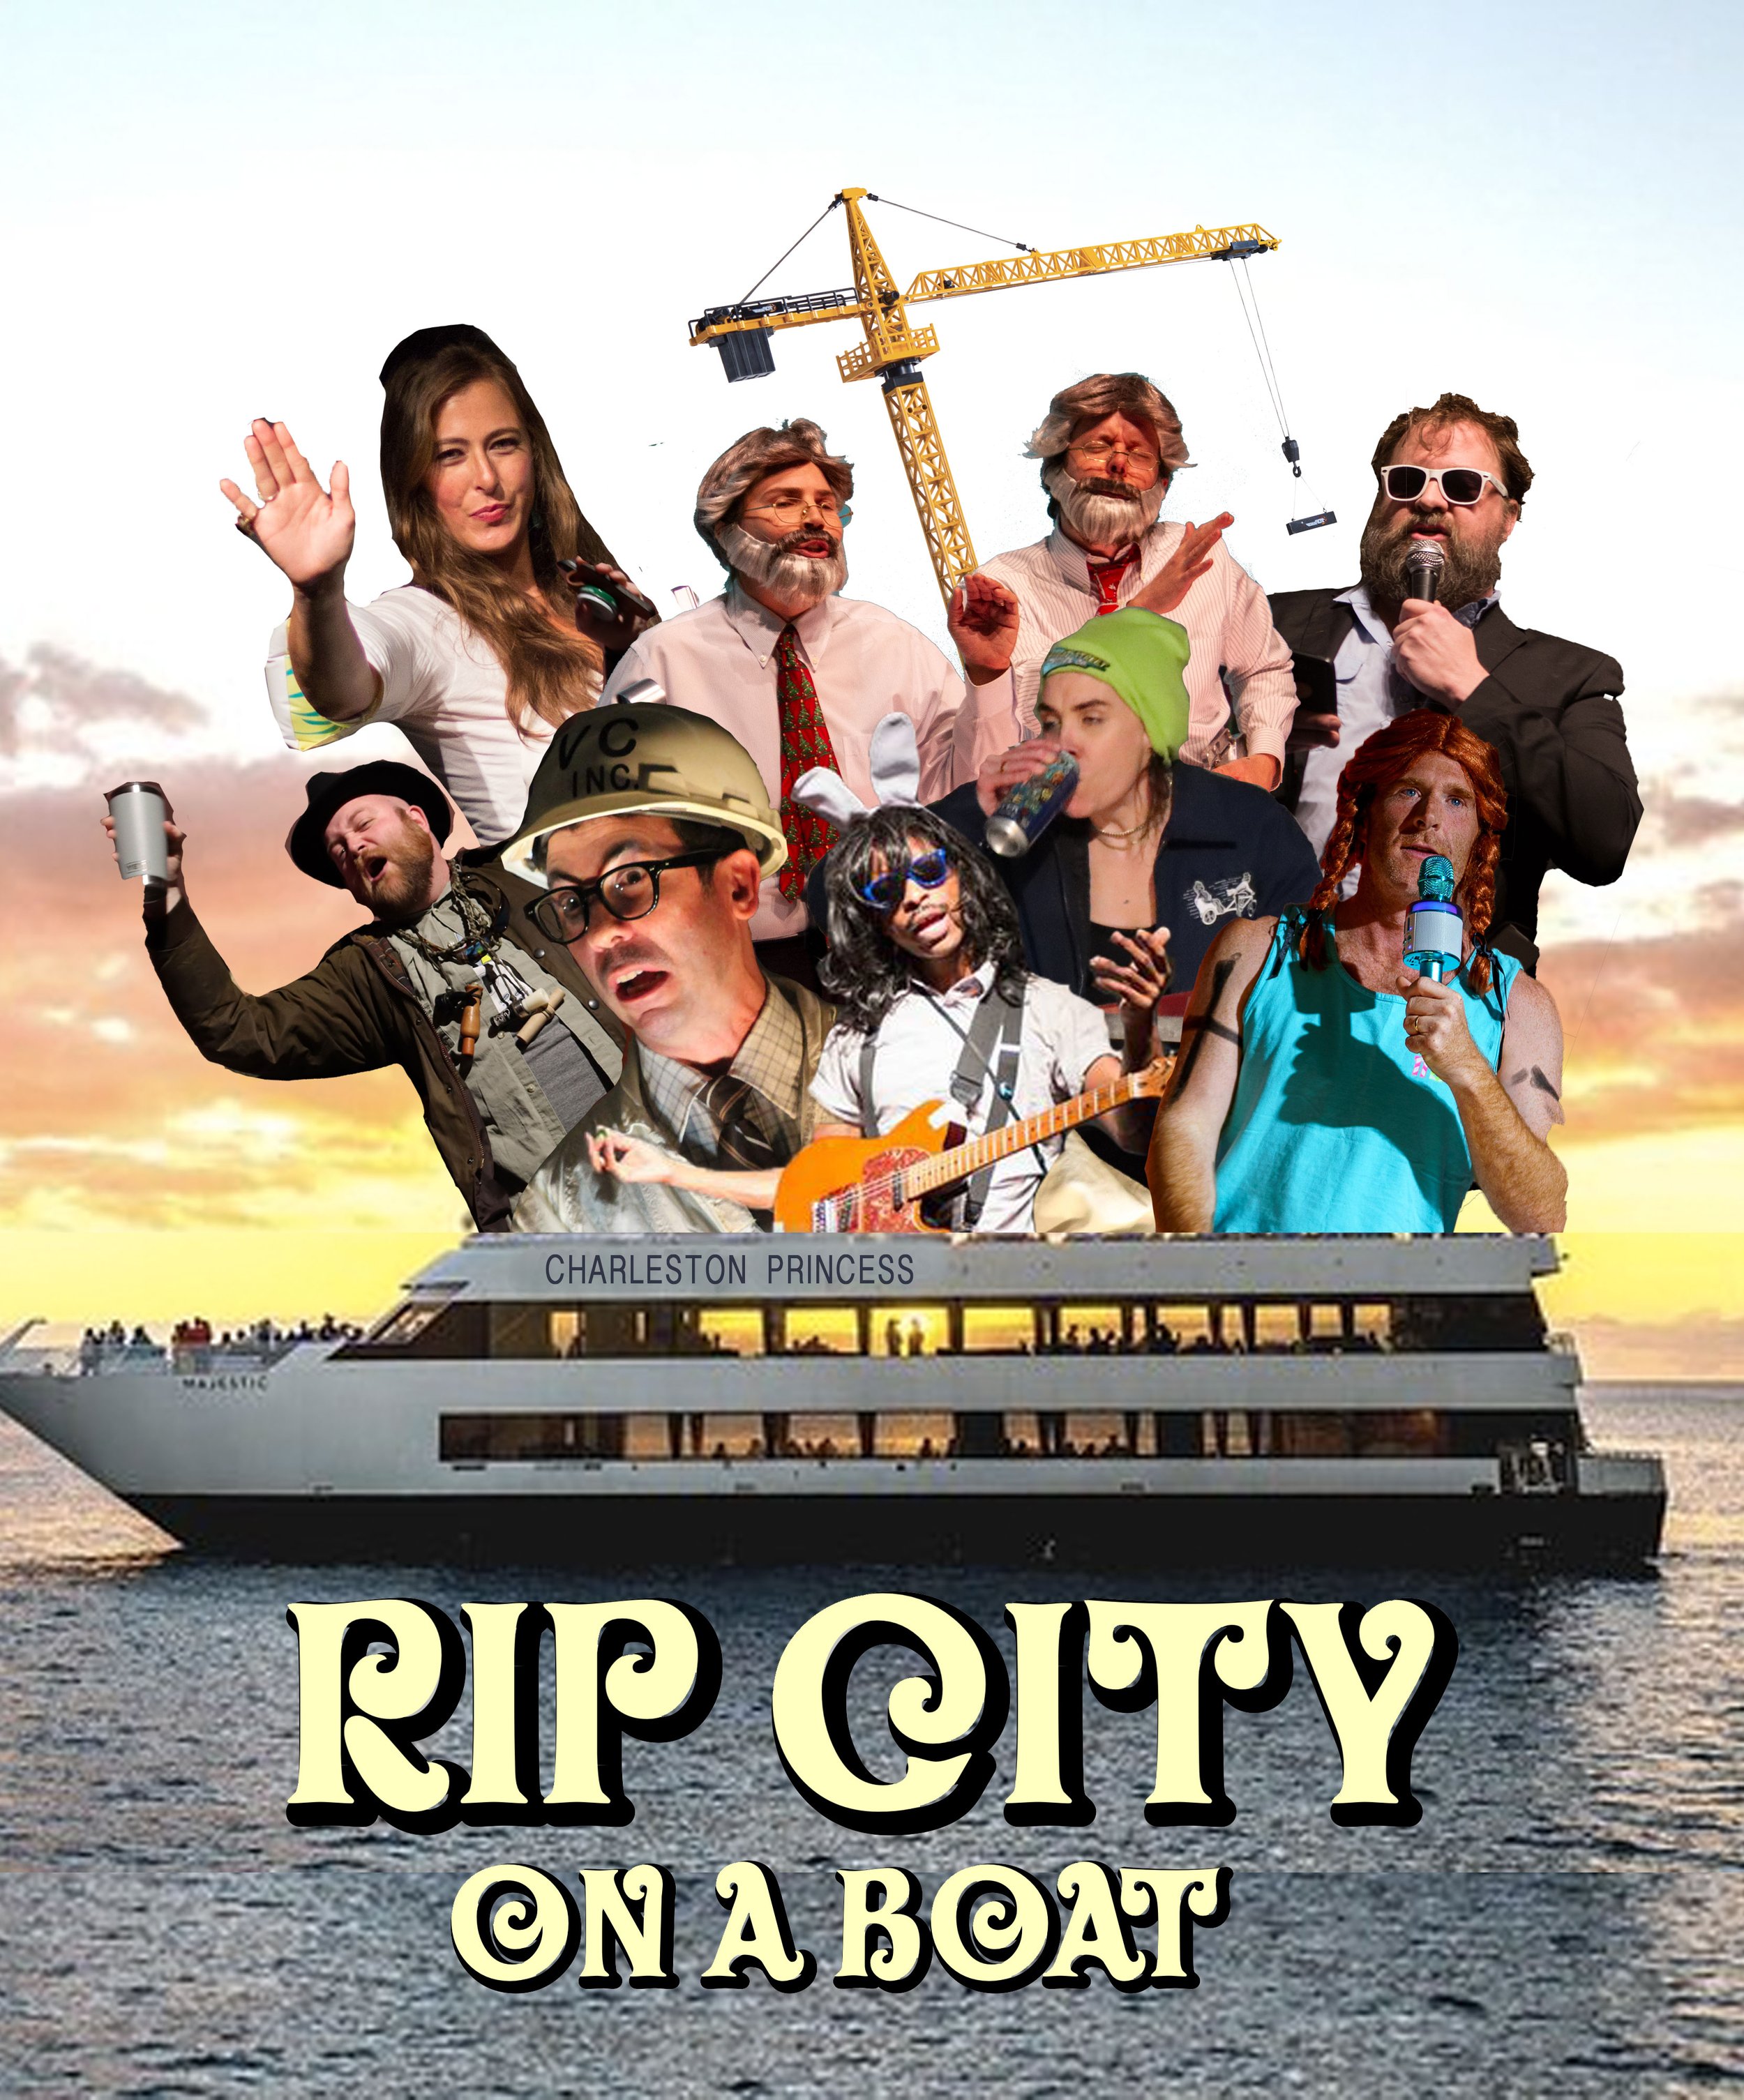 Rip City on a Boat